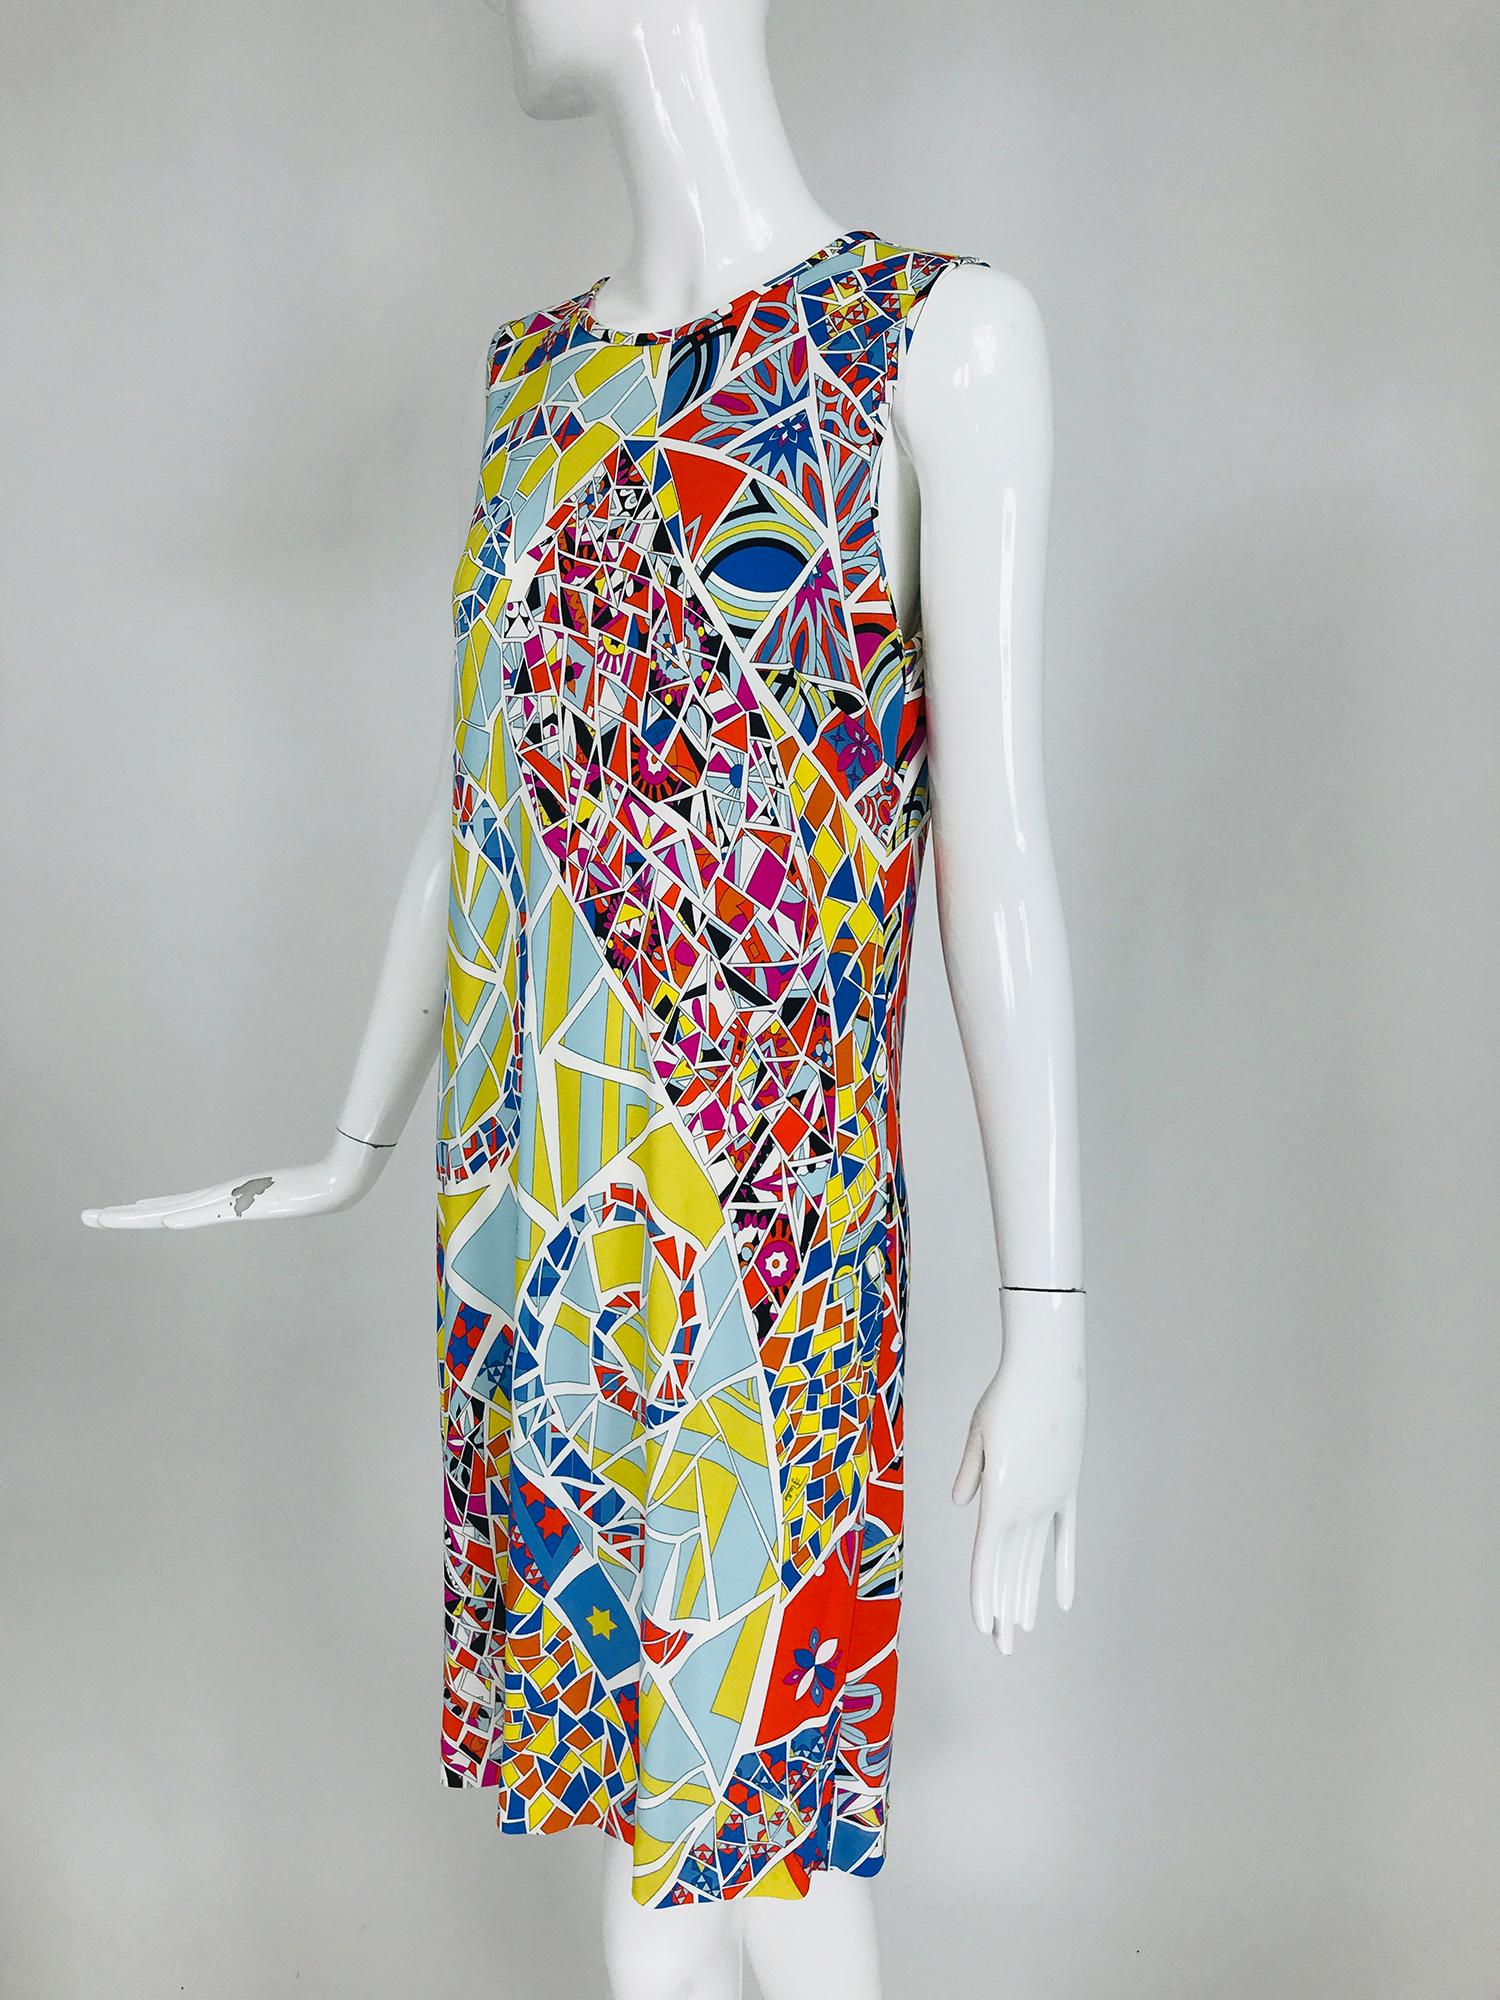 Emilio Pucci silk & rayon blend jersey, sleeveless star print shift dress marked size 42. Pull on sleeveless dress has a jewel neckline that closes at the back with a button and loop. Bold mosaic print in bright colours featuring stars. Perfect